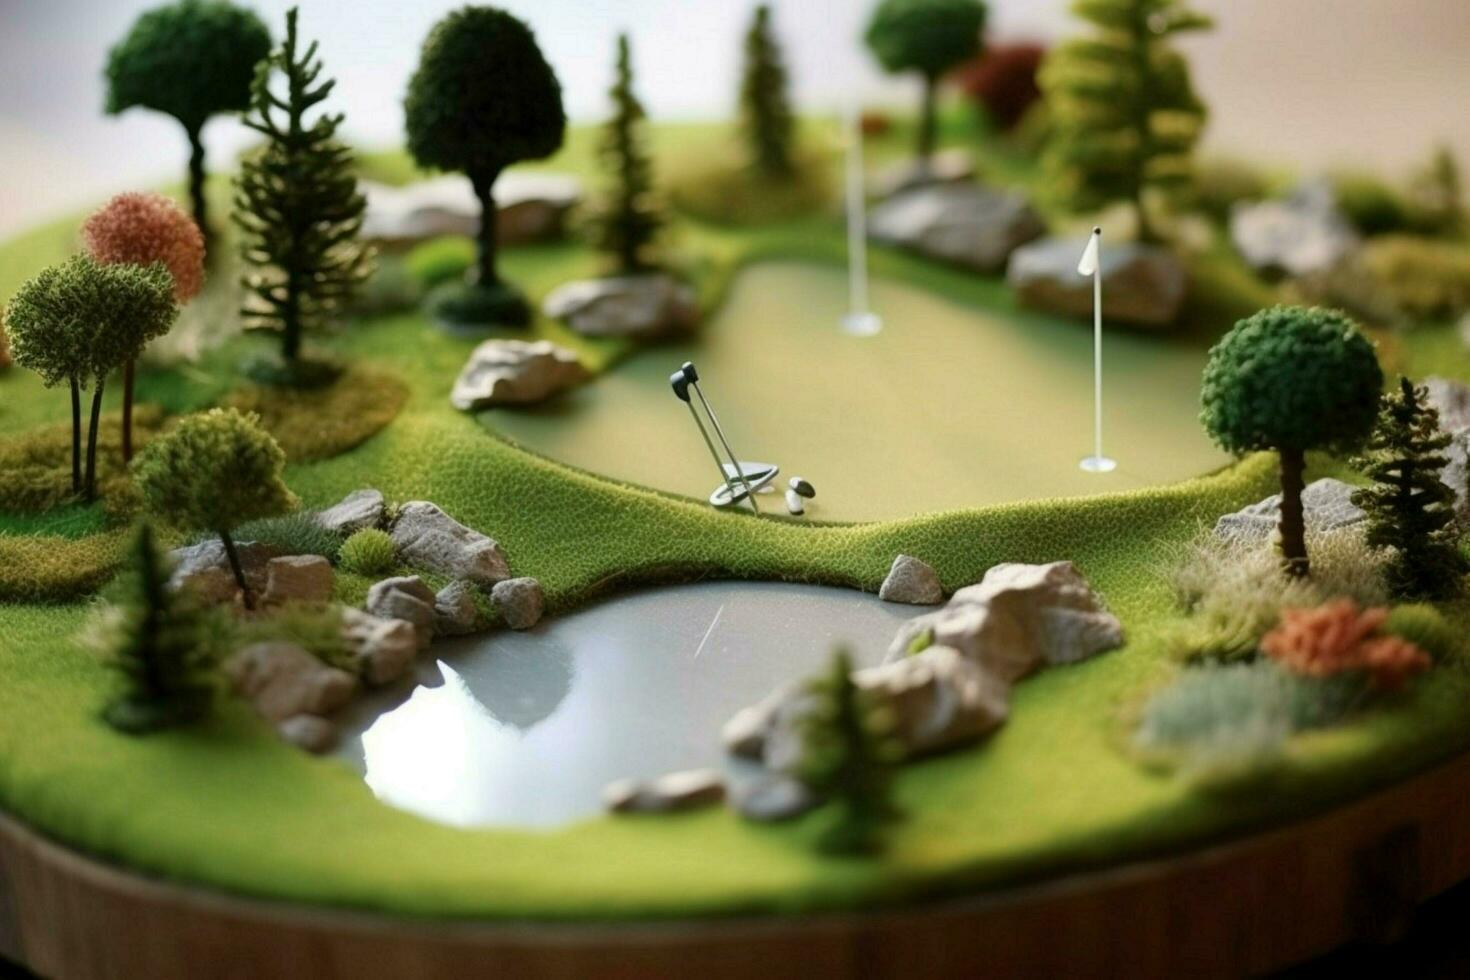 A mini golf set for practicing putting photo